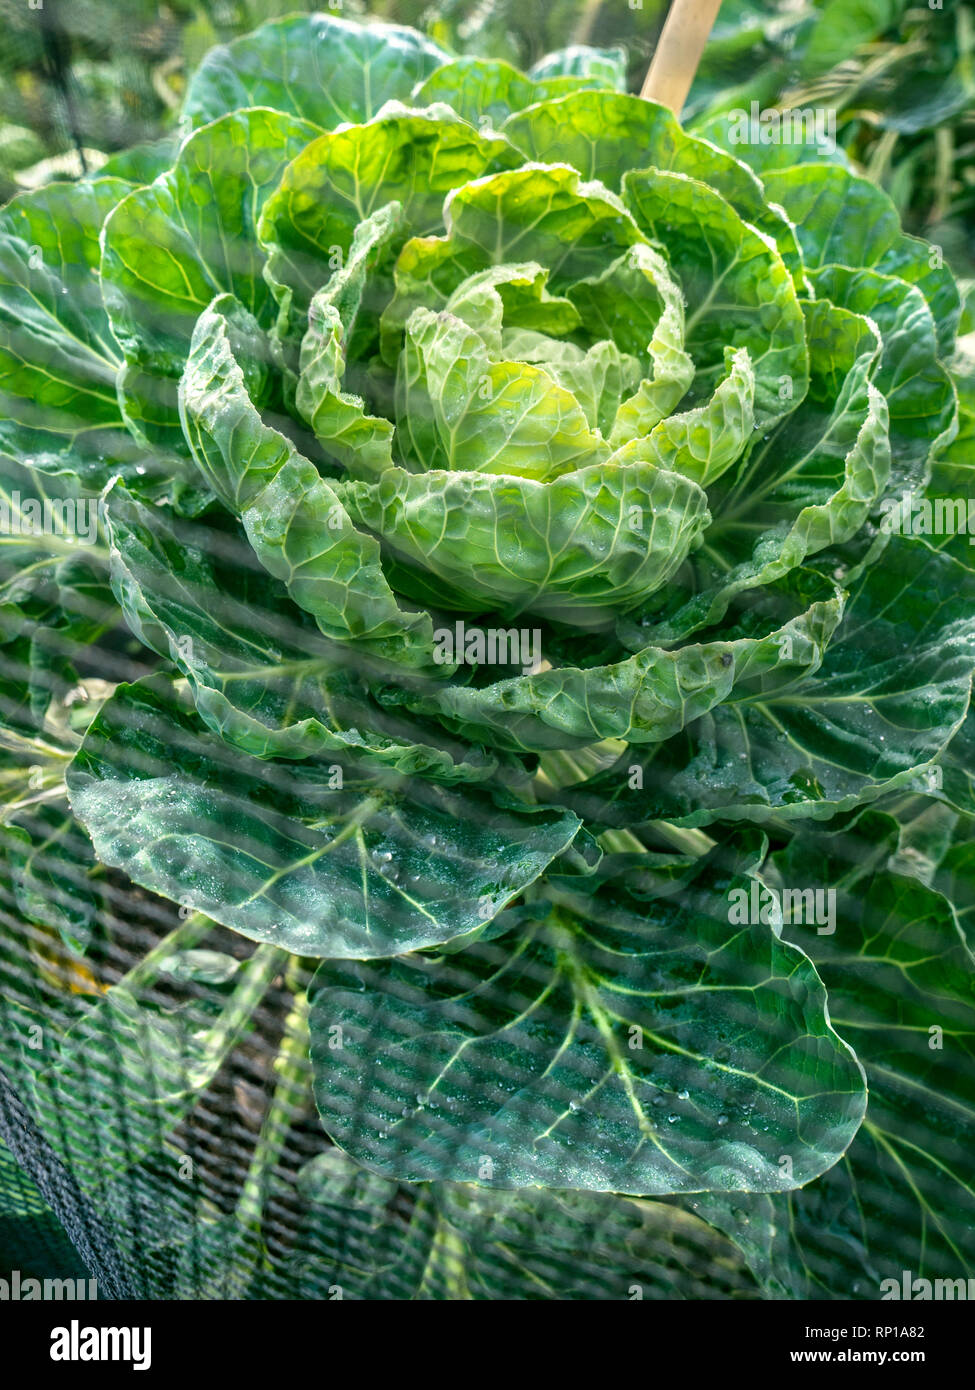 ‘SPROUT TOPS’ The cabbage head of a Brussels Sprouts allotment plant behind enviromesh anti-pest netting. Sprout tops are now recognised in their own right, having rich stores of two vitamins in particular: anti-inflammatory vitamin K, which like calcium, helps build bone density; and vitamin C, which helps strengthen the immune system – a real winner particularly in winter. The Brussels sprout is a member of the Gemmifera Group of cabbages (Brassica oleracea), grown for its edible buds. SPROUT TOPS cook like open-hearted cabbages, shredding and sautéing, boiling or adding to stews. Stock Photo